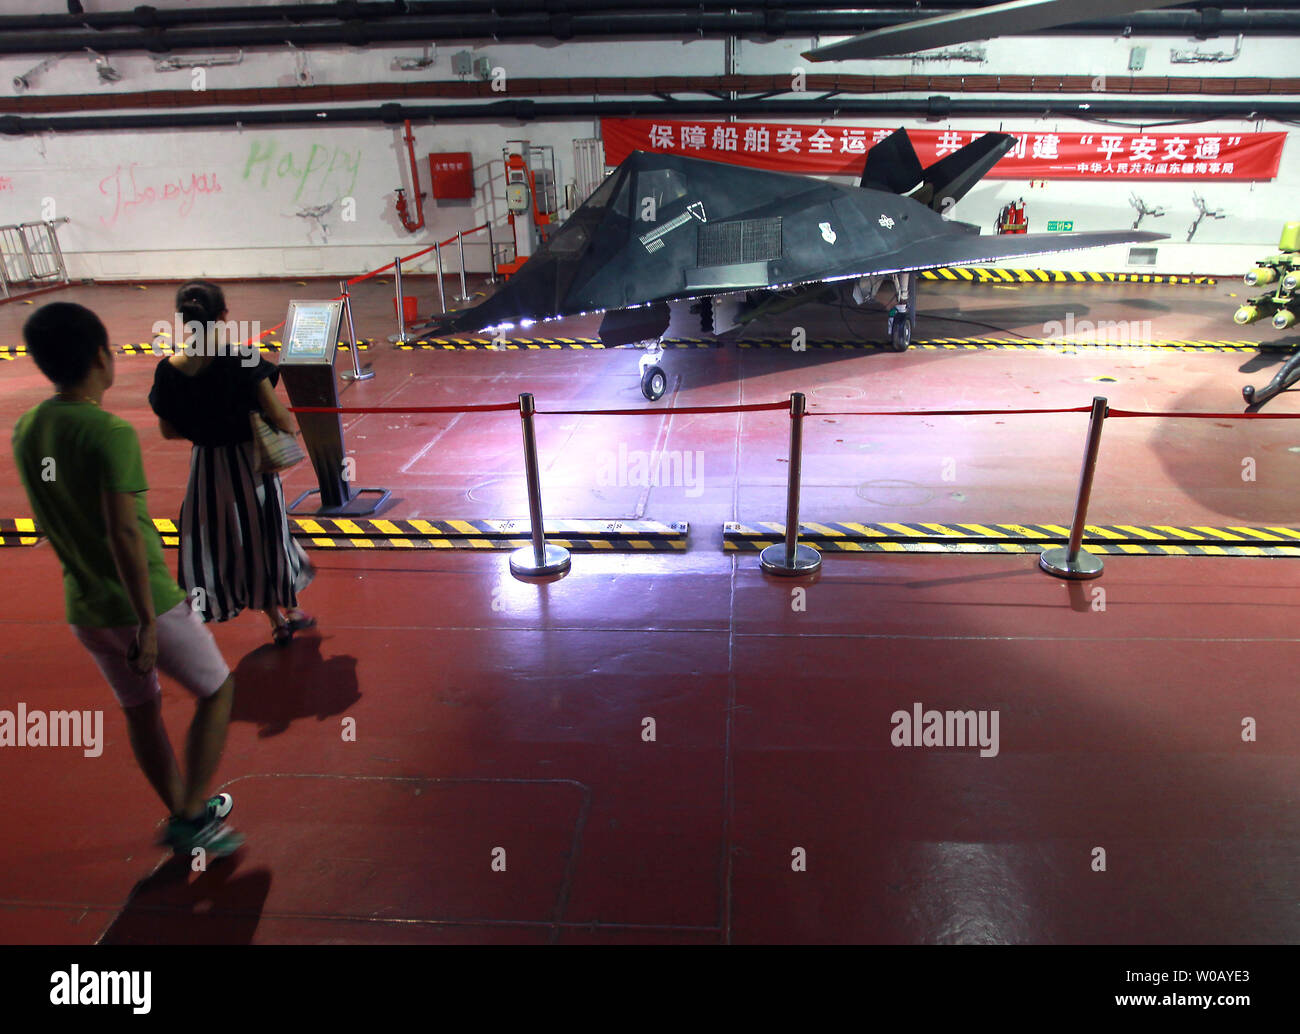 Chinese tourists visit the Binhai Aircraft Carrier Theme Park, featuring the ex-Russian heavy aircraft cruiser the Kiev with a small-scale model of a U.S. stealth fighter, in Tianjin on July 29, 2014.  The Kiev was a heavy aircraft-carrying cruiser that served the Soviet and Russian navies from 1975 to 1993 before being sold to a Chinese company in 1996 for use in a military theme park.  Over $15.5 million was spent restoring and outfitting the ex-warship into a luxury hotel developed by tourism and attraction consultant Leisure Quest International (USA).      UPI/Stephen Shaver Stock Photo